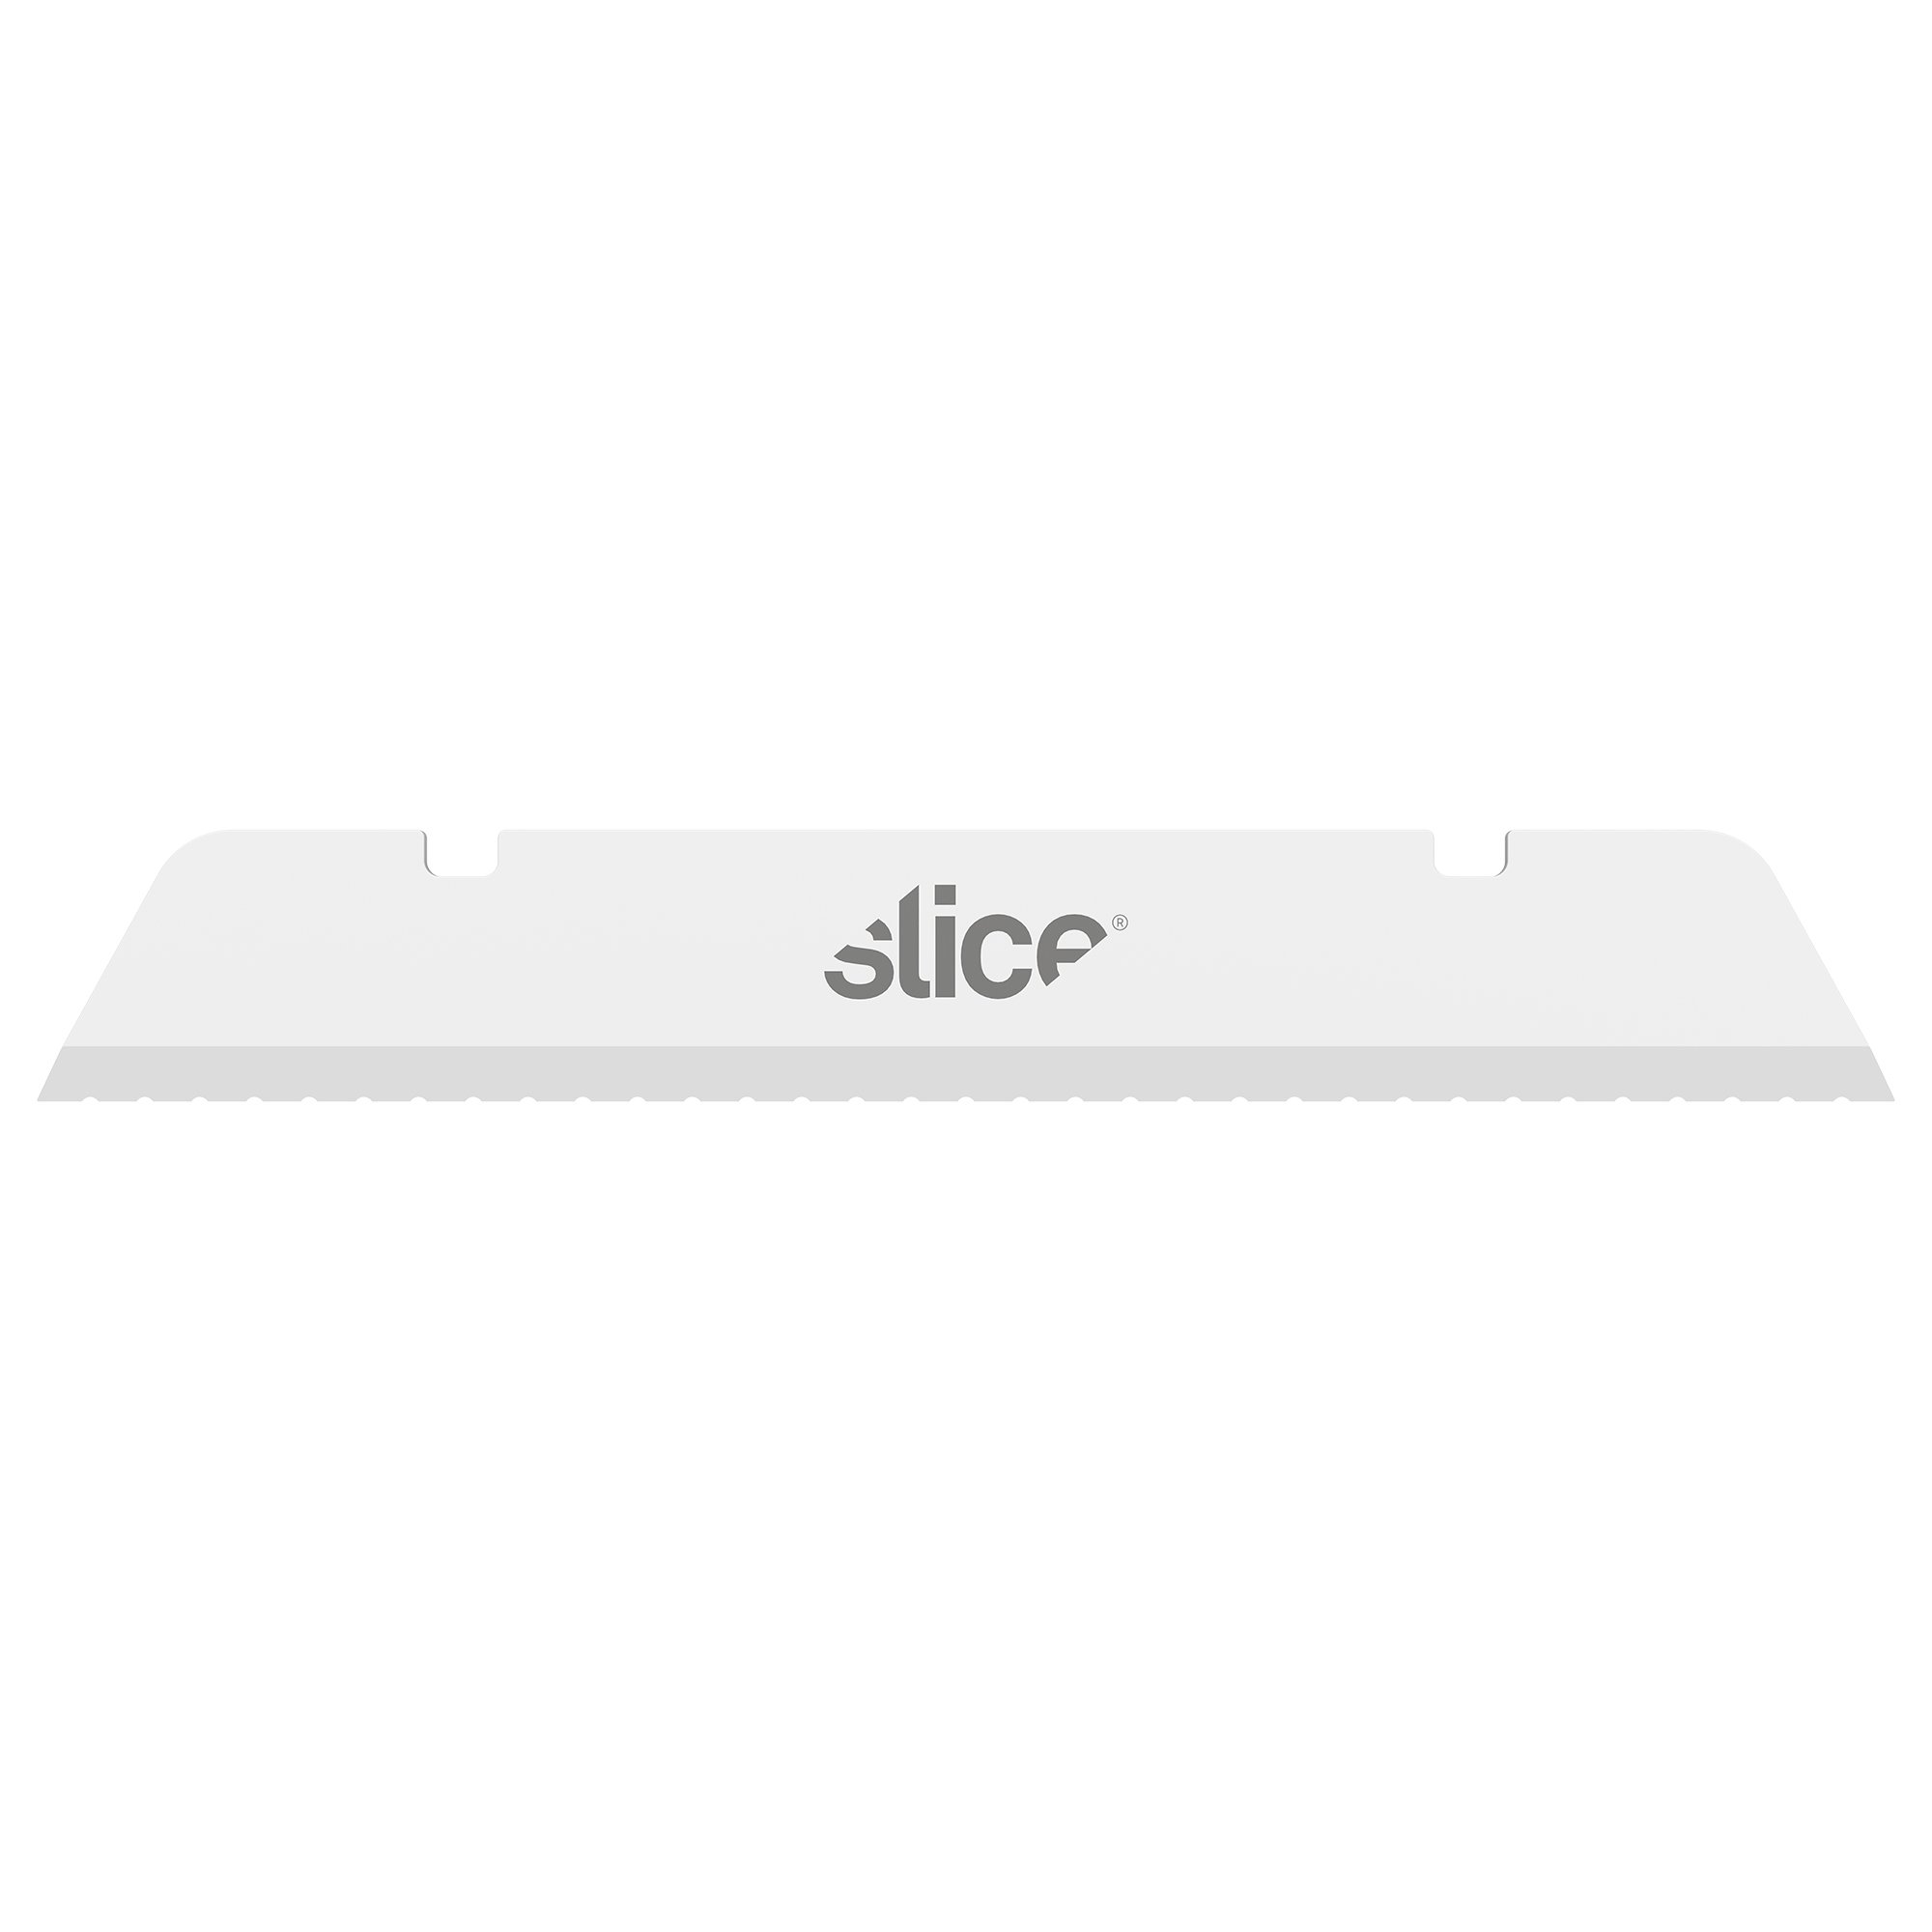 Slice 10474 Adjustable Slim Pen Cutter, Blade Auto Retracts Once Cutting  Depth is Set, Never Rusts, Finger-Friendly Blade Lasts up to 11x Longer  Than